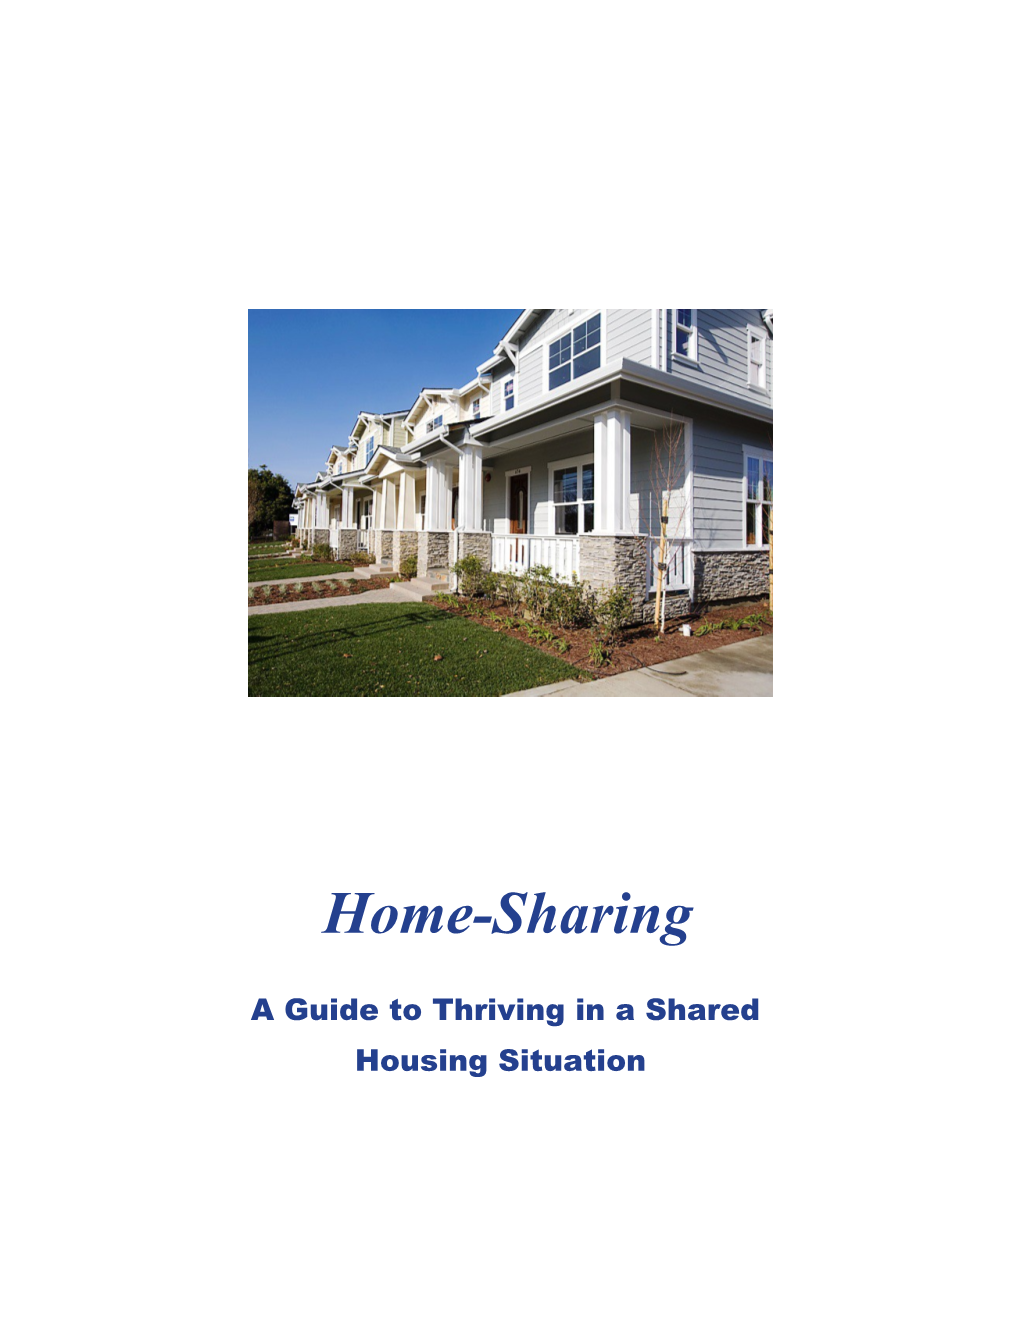 A Guide to Thriving in a Shared Housing Situation